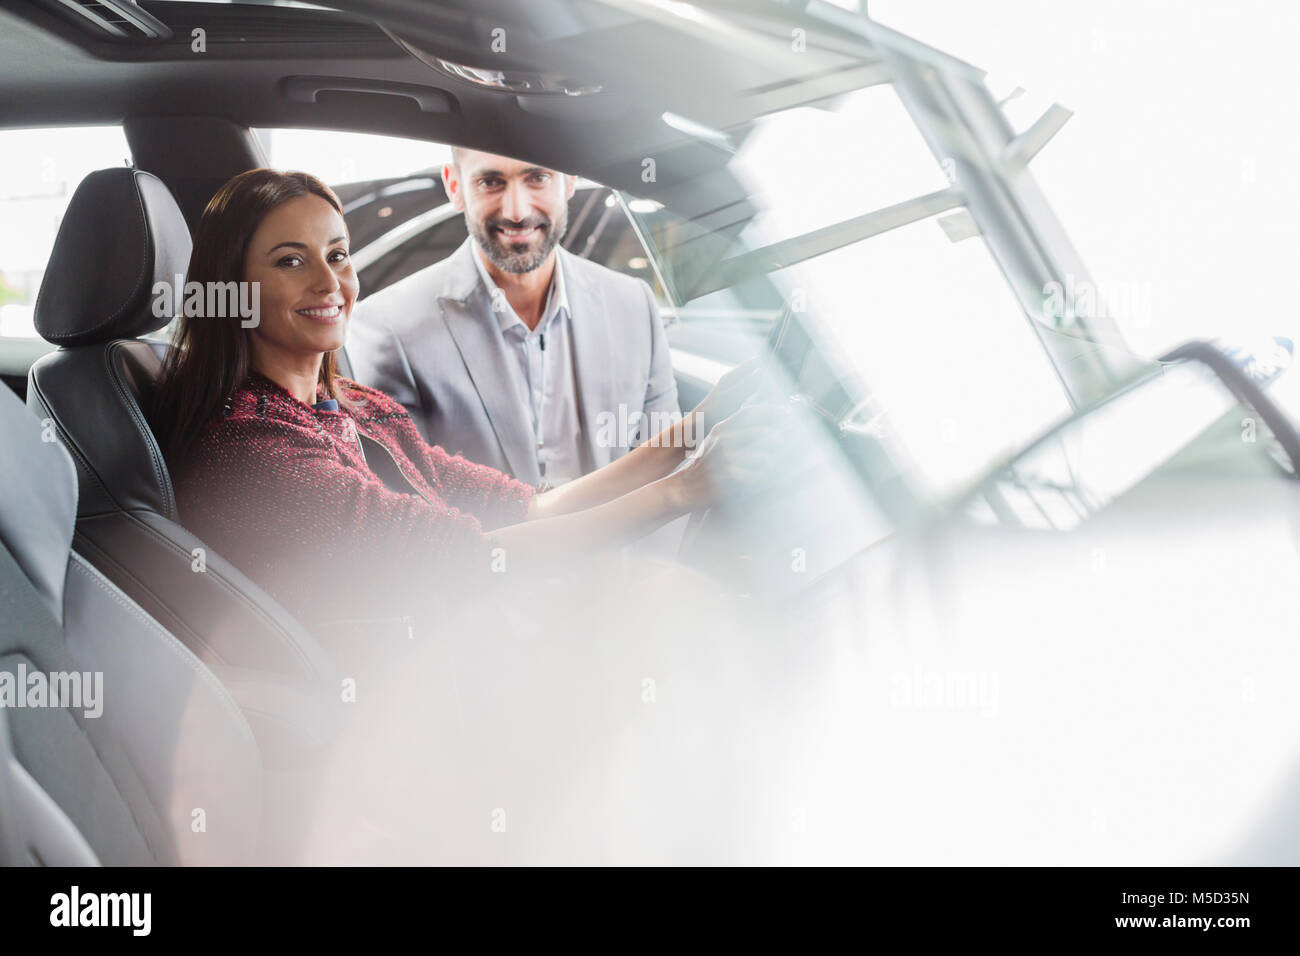 Portrait smiling car salesman and female customer in driver’s seat of new car in car dealership Stock Photo